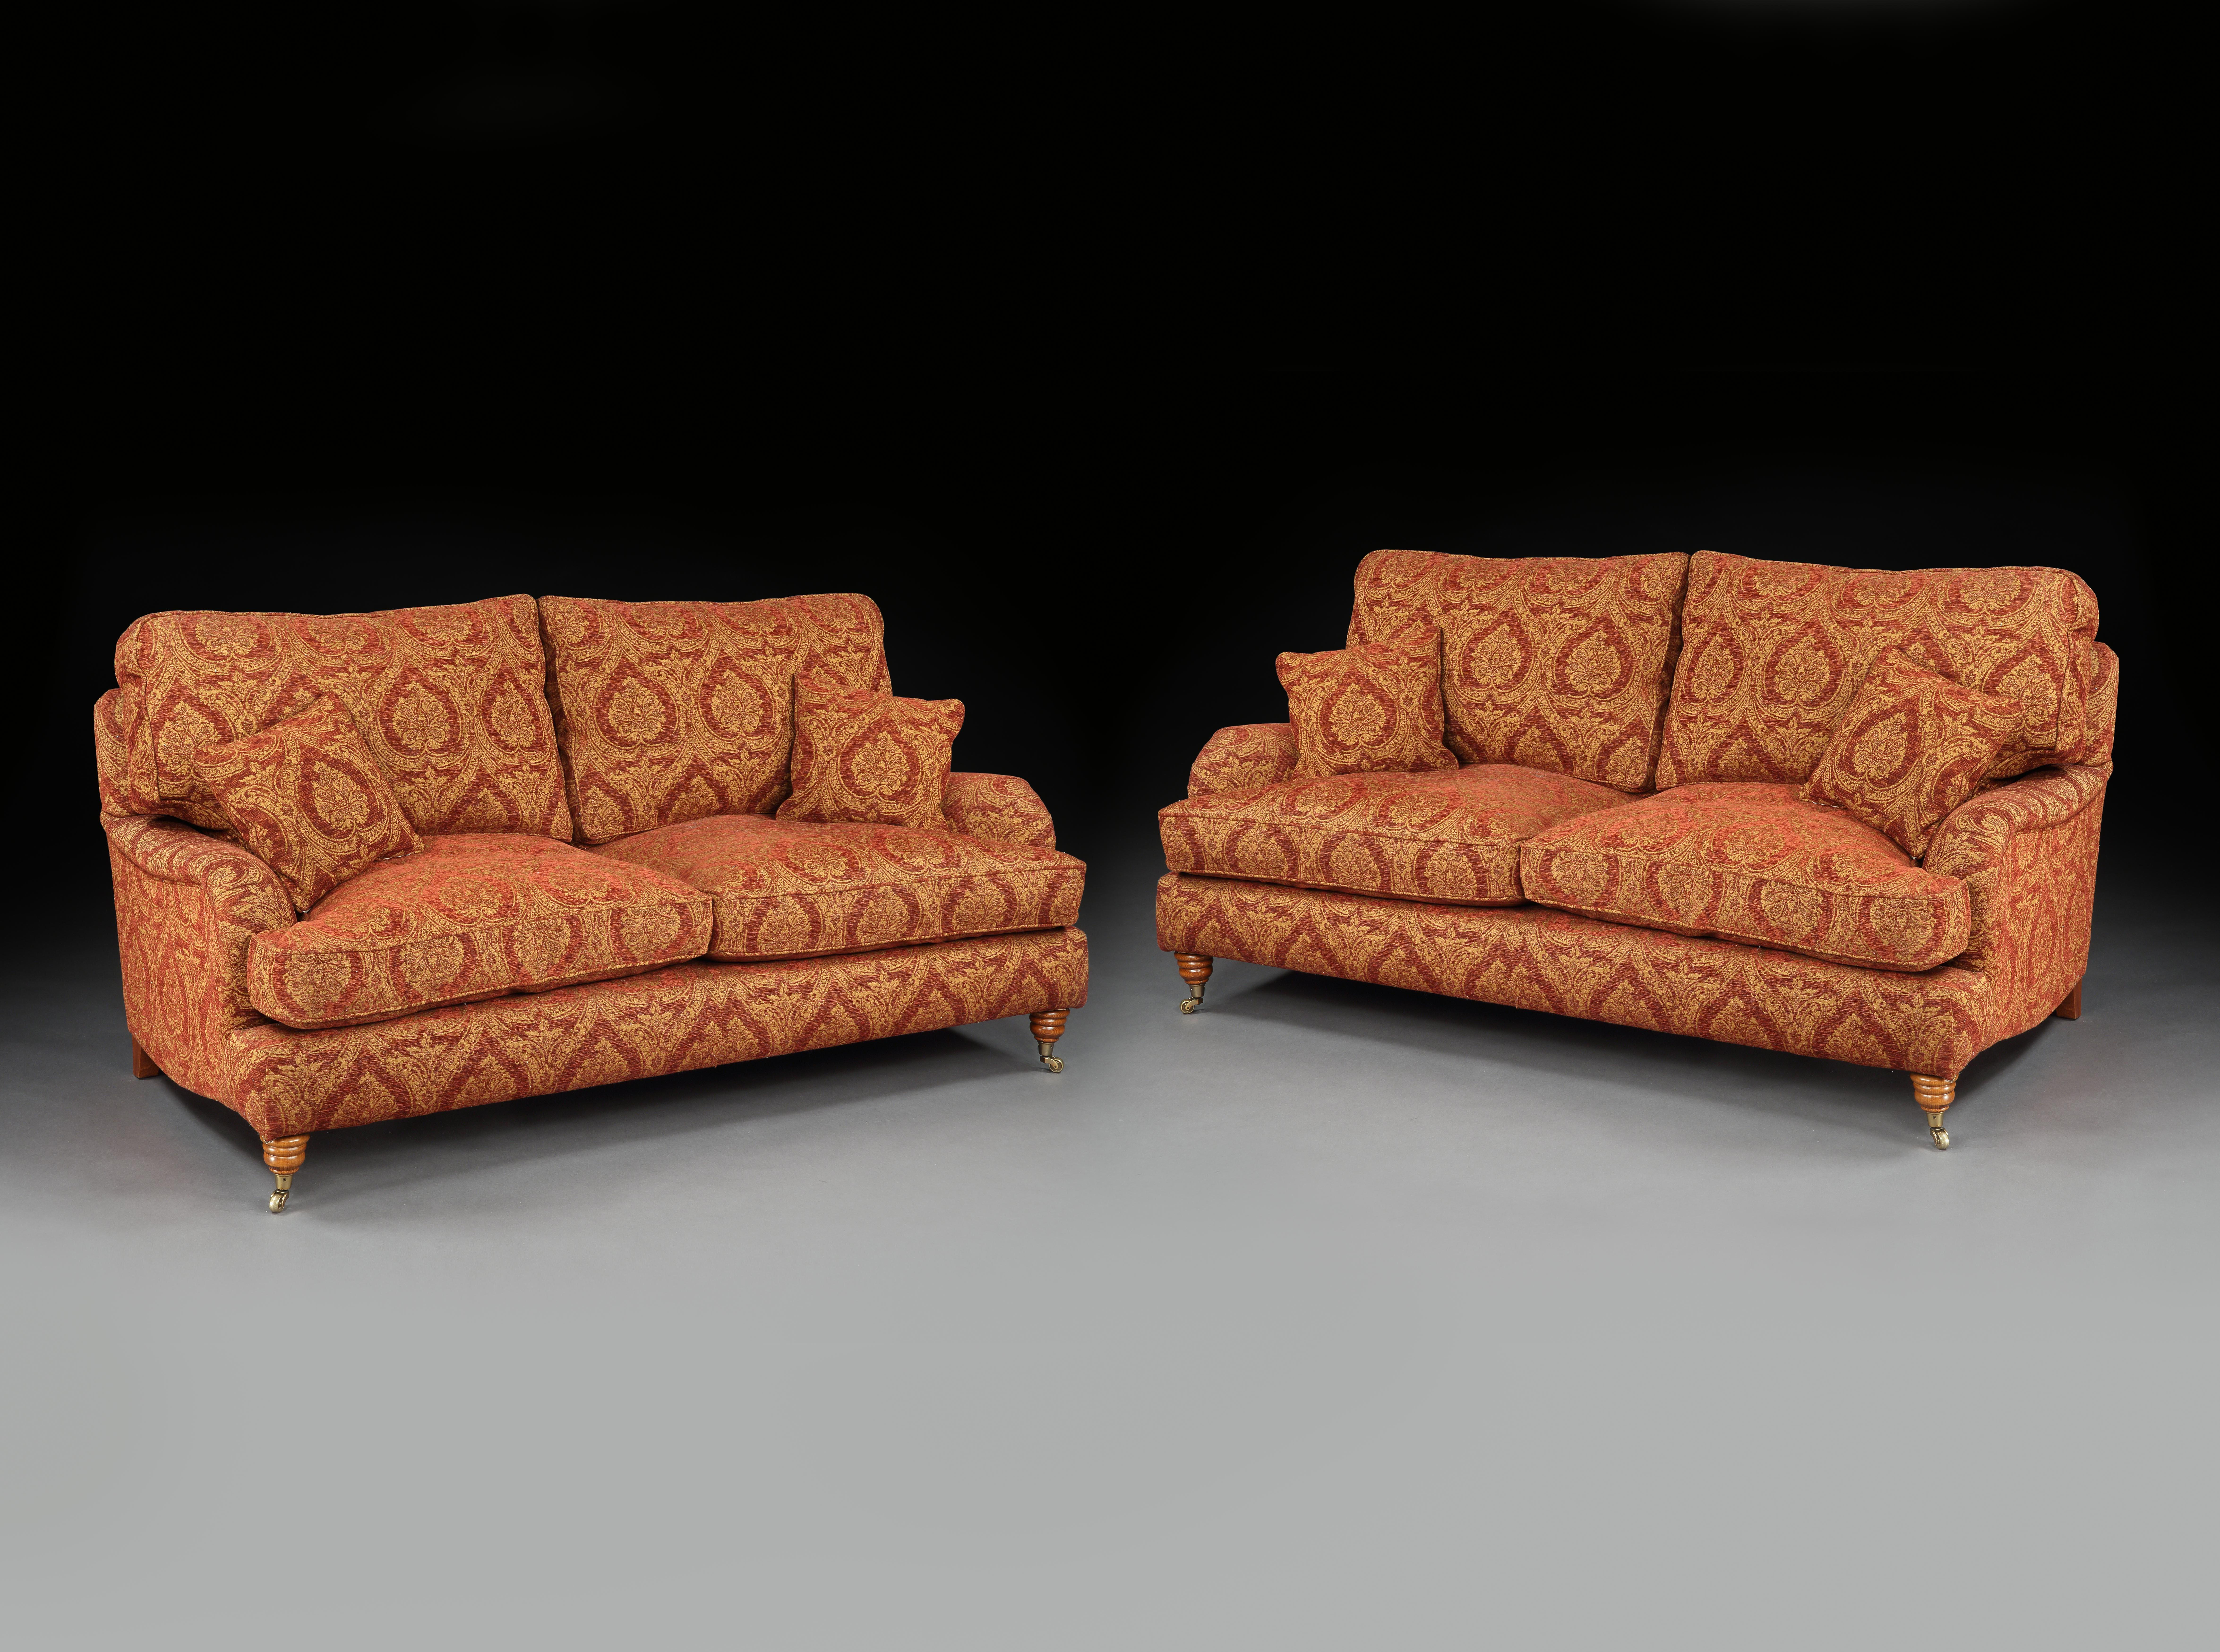 A striking pair of 1998, 3-seat, Parker & Farr, Howard-Style Sofa’s or Settees
These settees recreate the iconic Howard shape. They are extremely comfortable and are in excellent condition with very little use having come from a secondary private